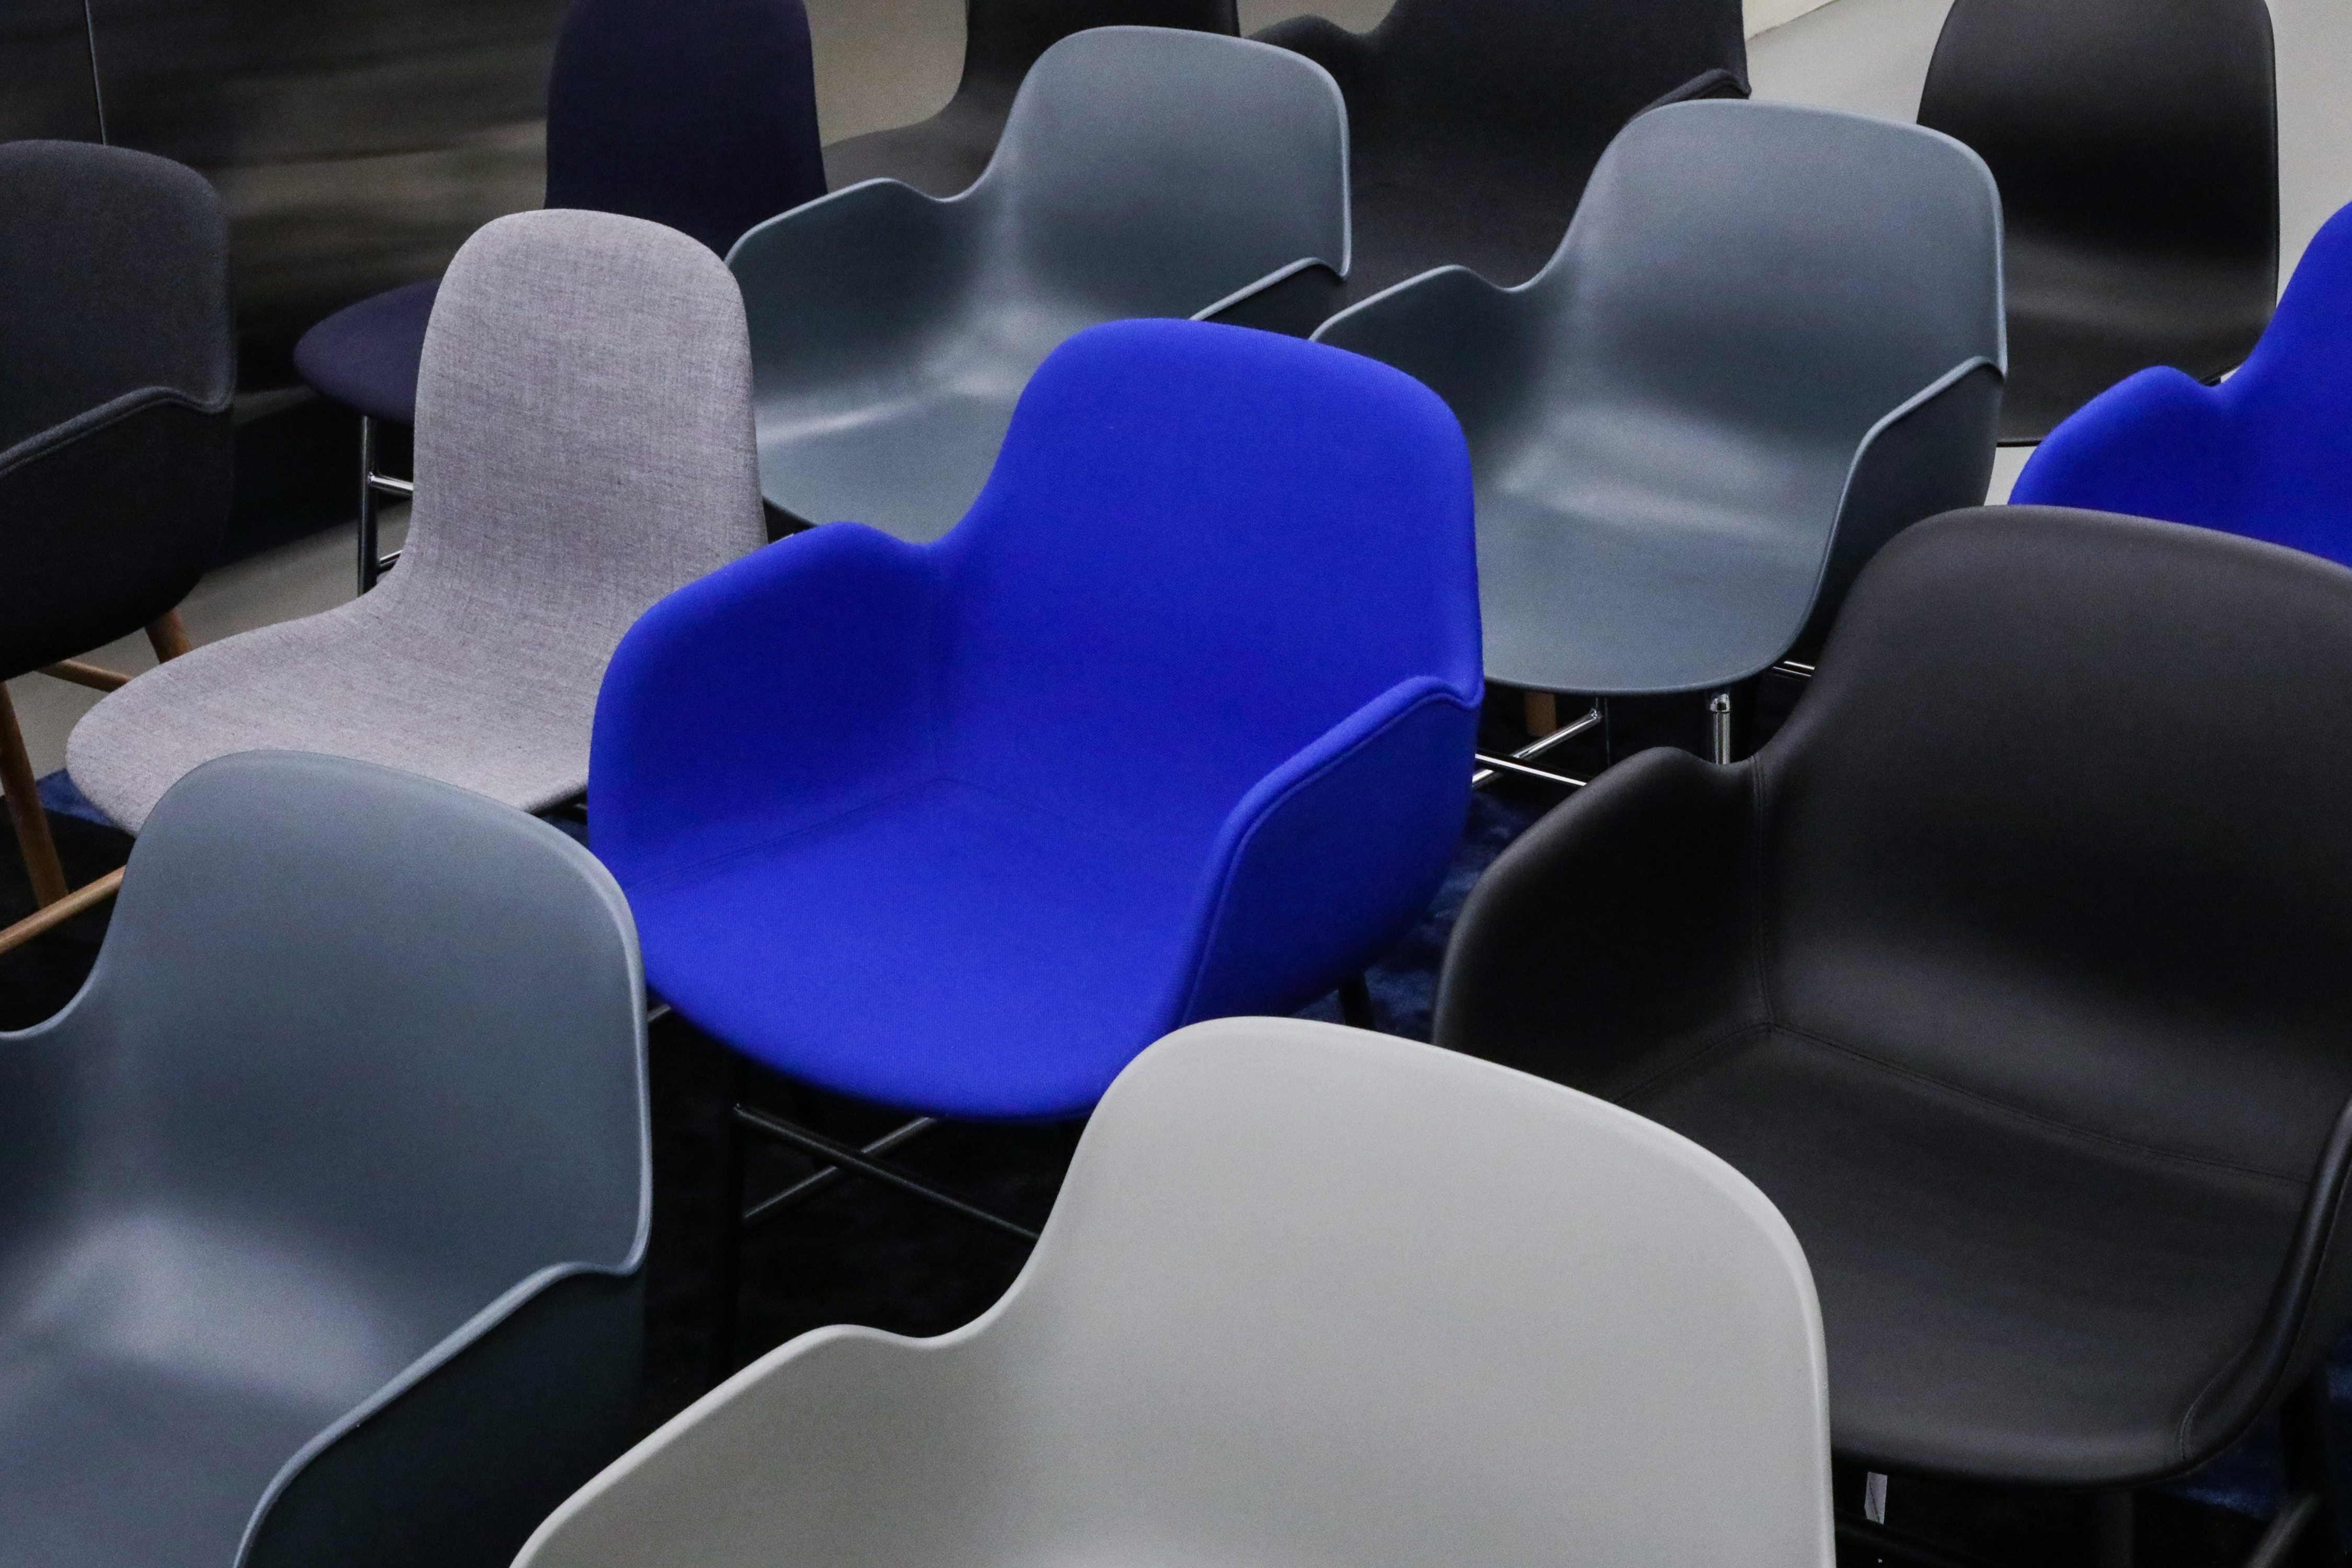 Assorted ergonomic chairs in shades of gray, blue, and black in a modern office setting, reflecting Dieter Rams' design principles in workplace furniture for enhanced comfort and style.